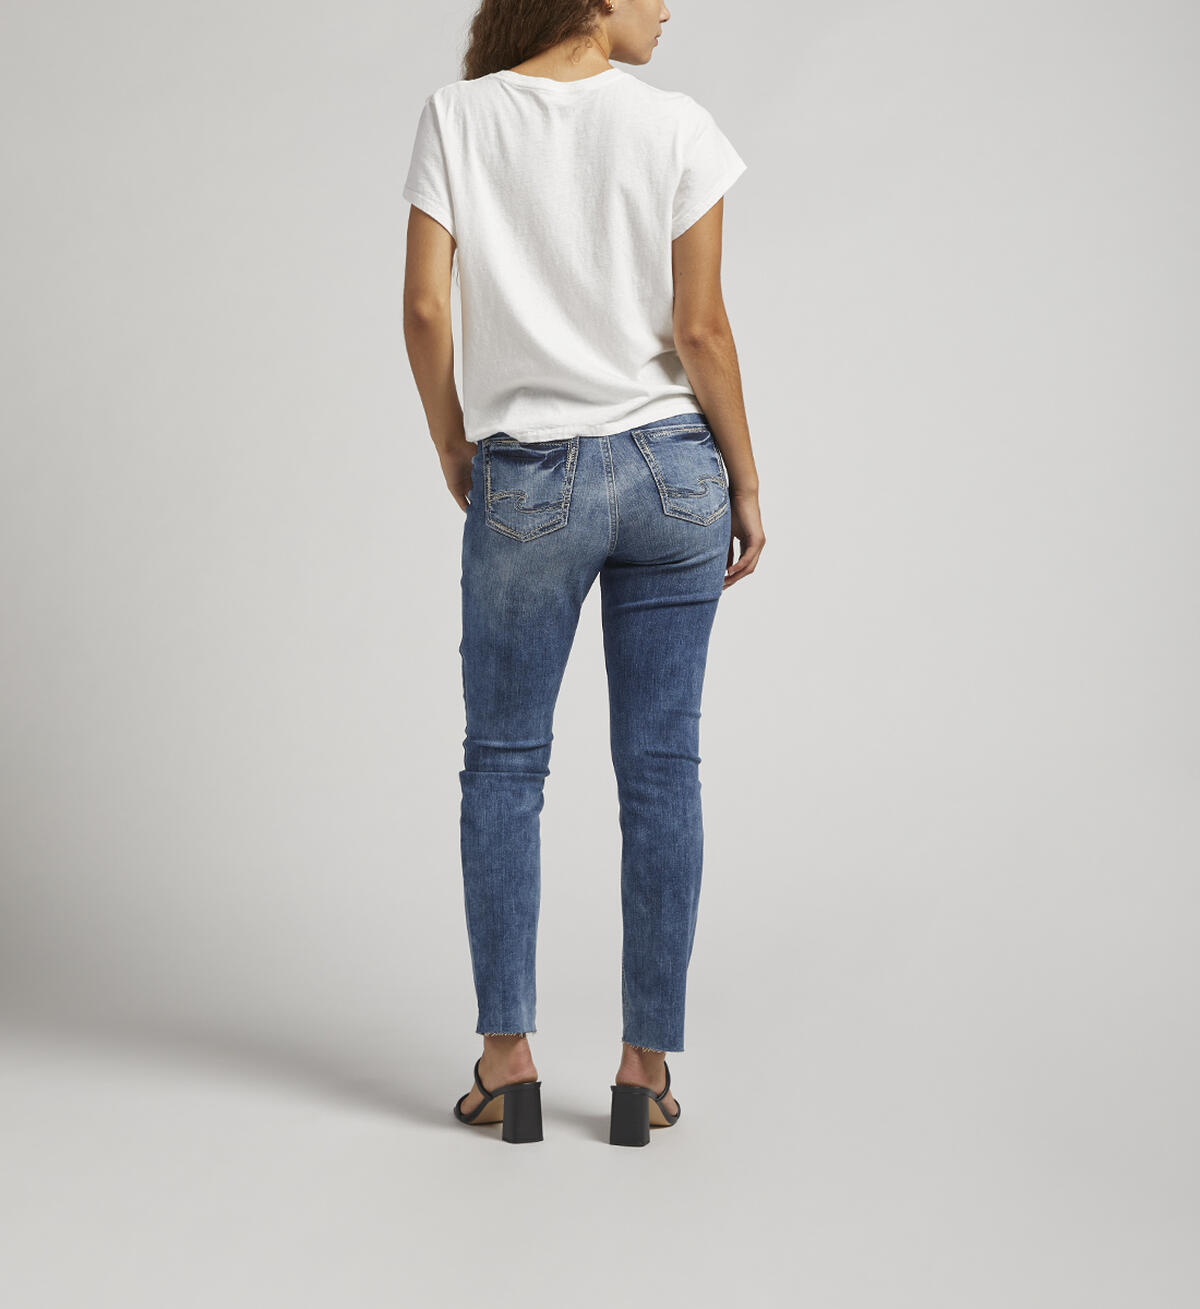 Hello Legs High Rise Slim Straight Jeans, , hi-res image number 1